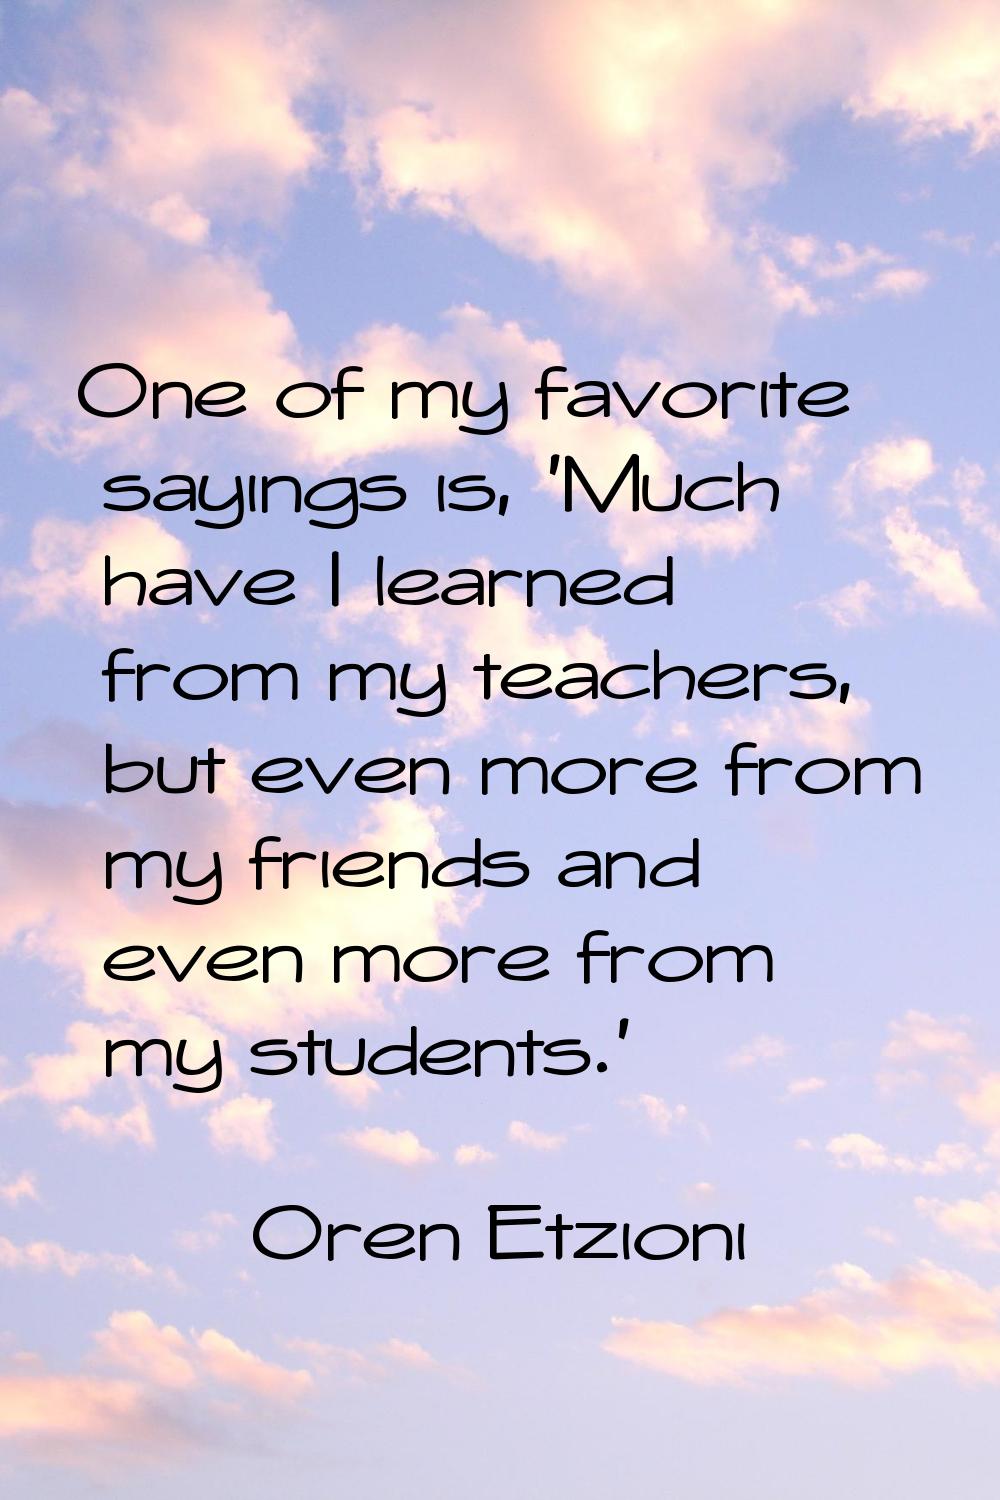 One of my favorite sayings is, 'Much have I learned from my teachers, but even more from my friends